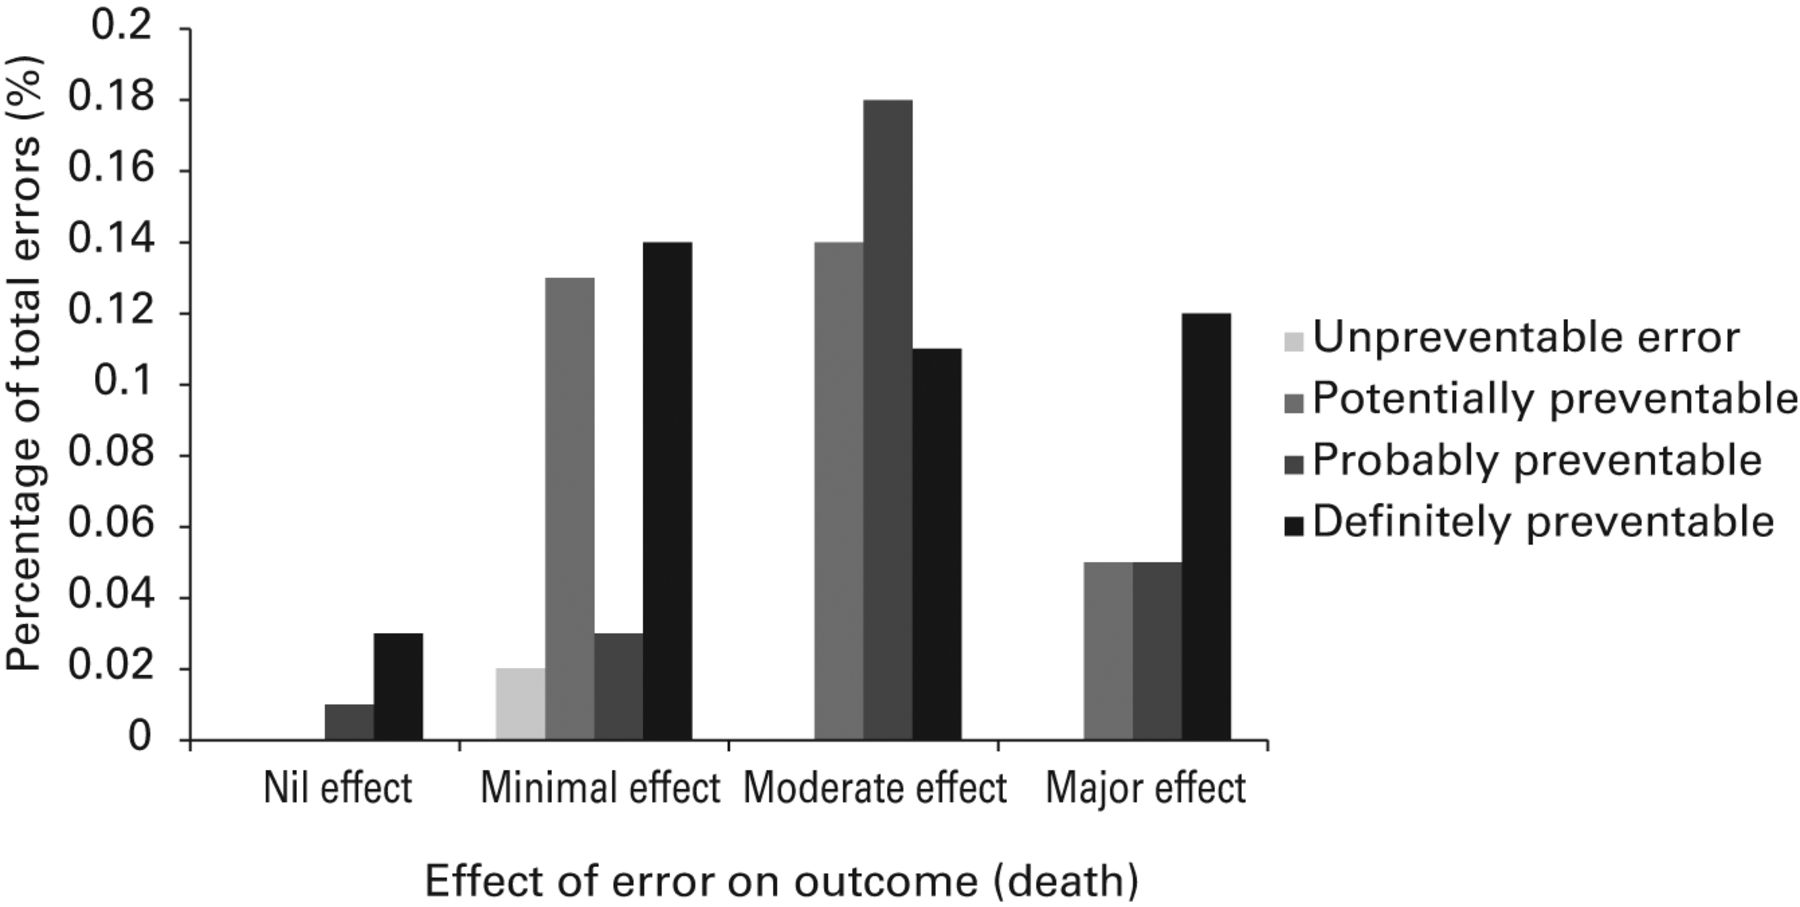 Fig. 3 
          Histrogram showing the effect of errors
on outcome and preventability.
        